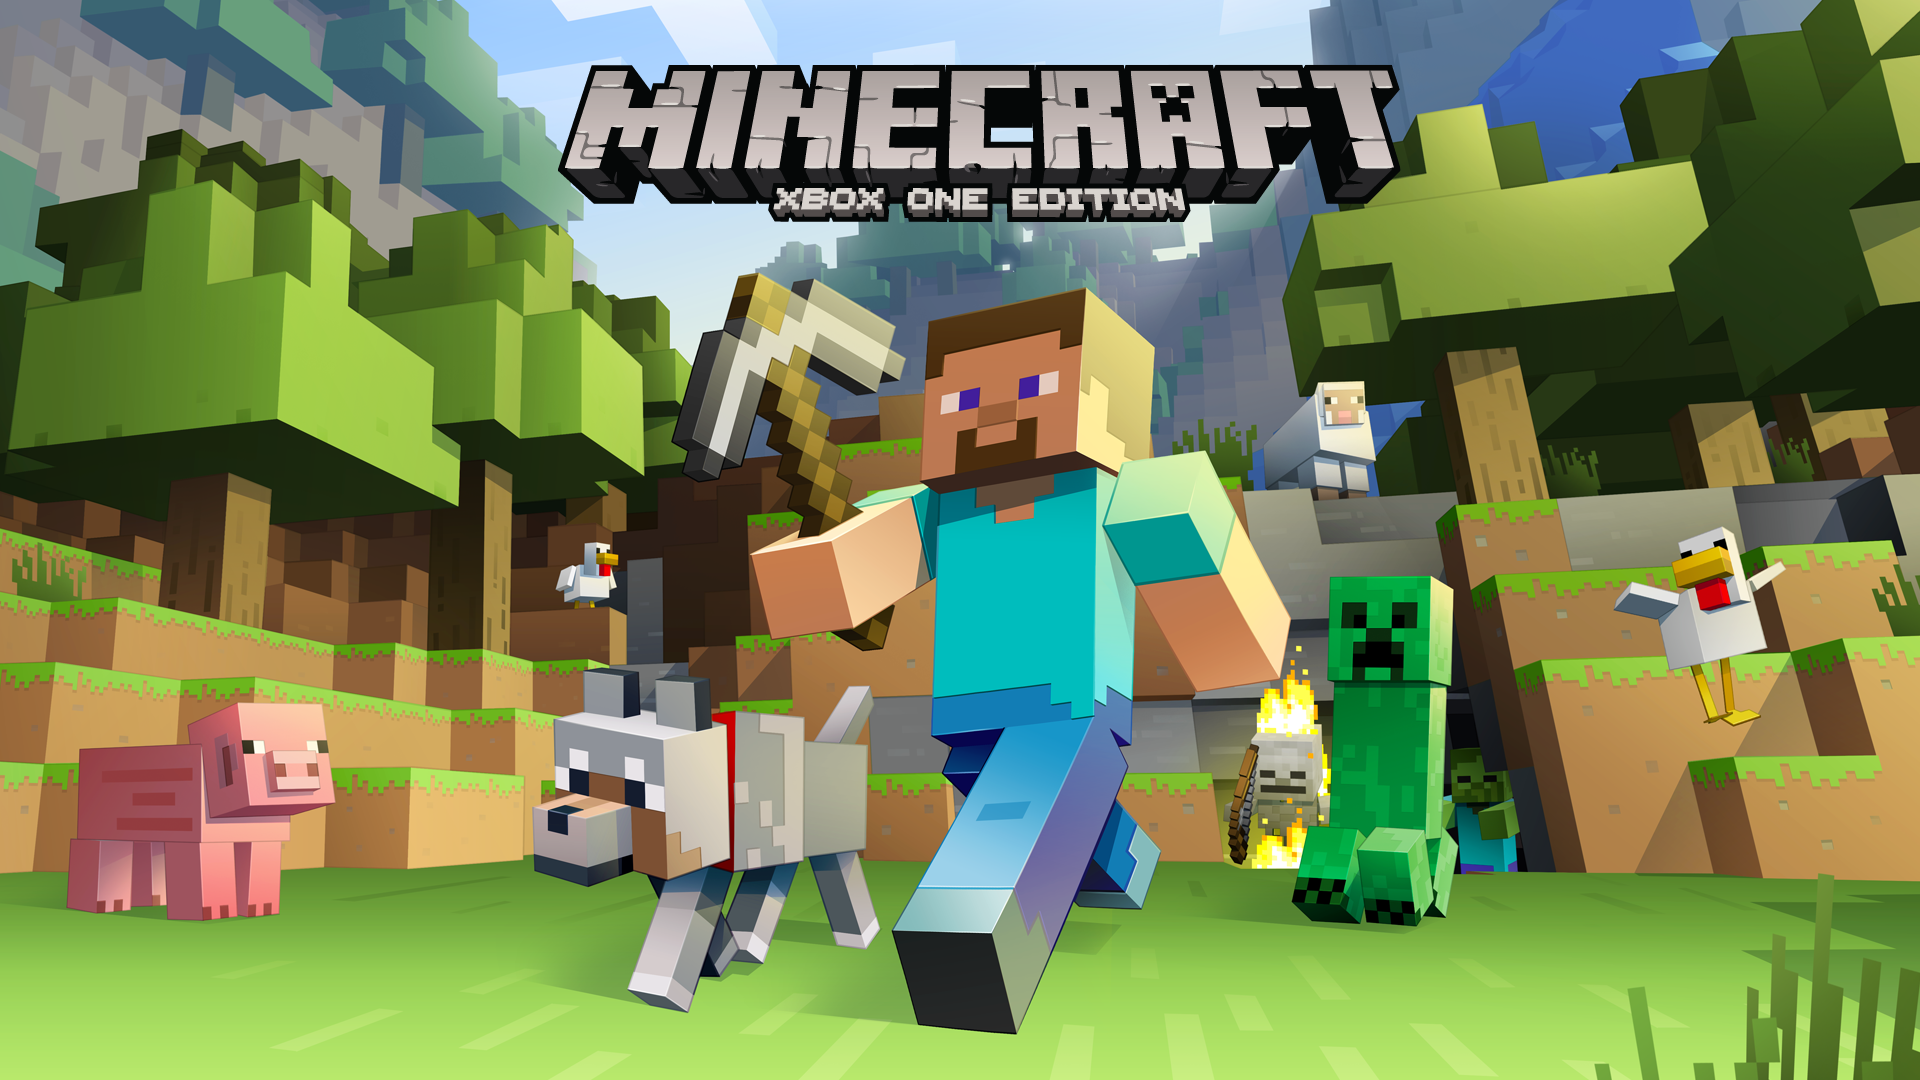 4J Studios've handed Minecraft: Xbox One Edition over to Microsoft for final test! #MinecraftXbox1